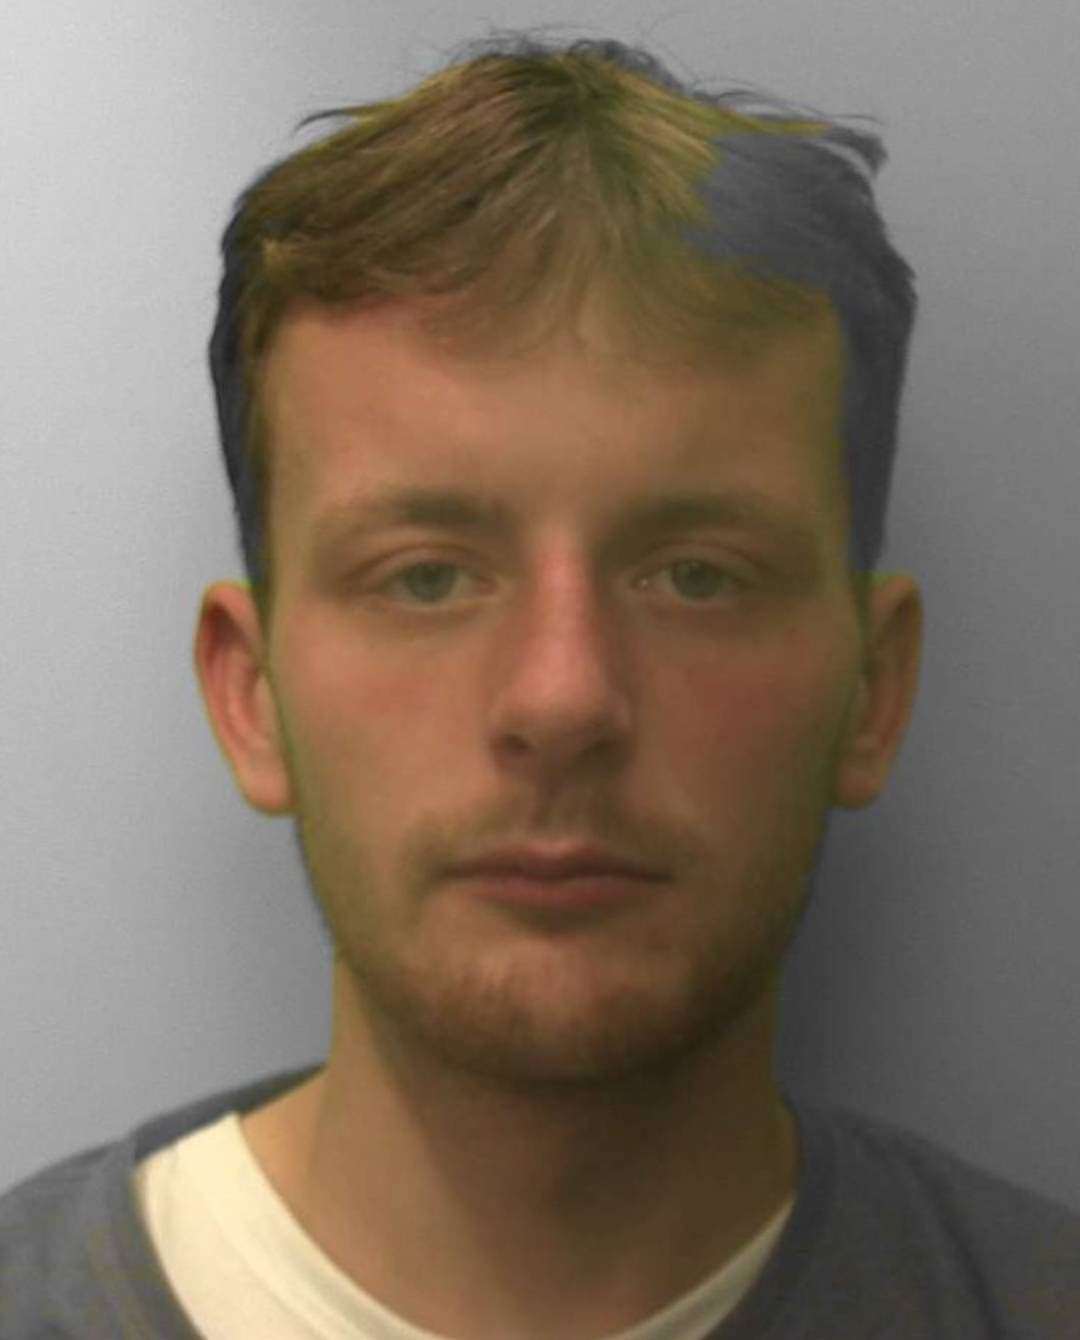 Hythe man Jake Finn was jailed for crimes in East Sussex. Photo: Sussex Police